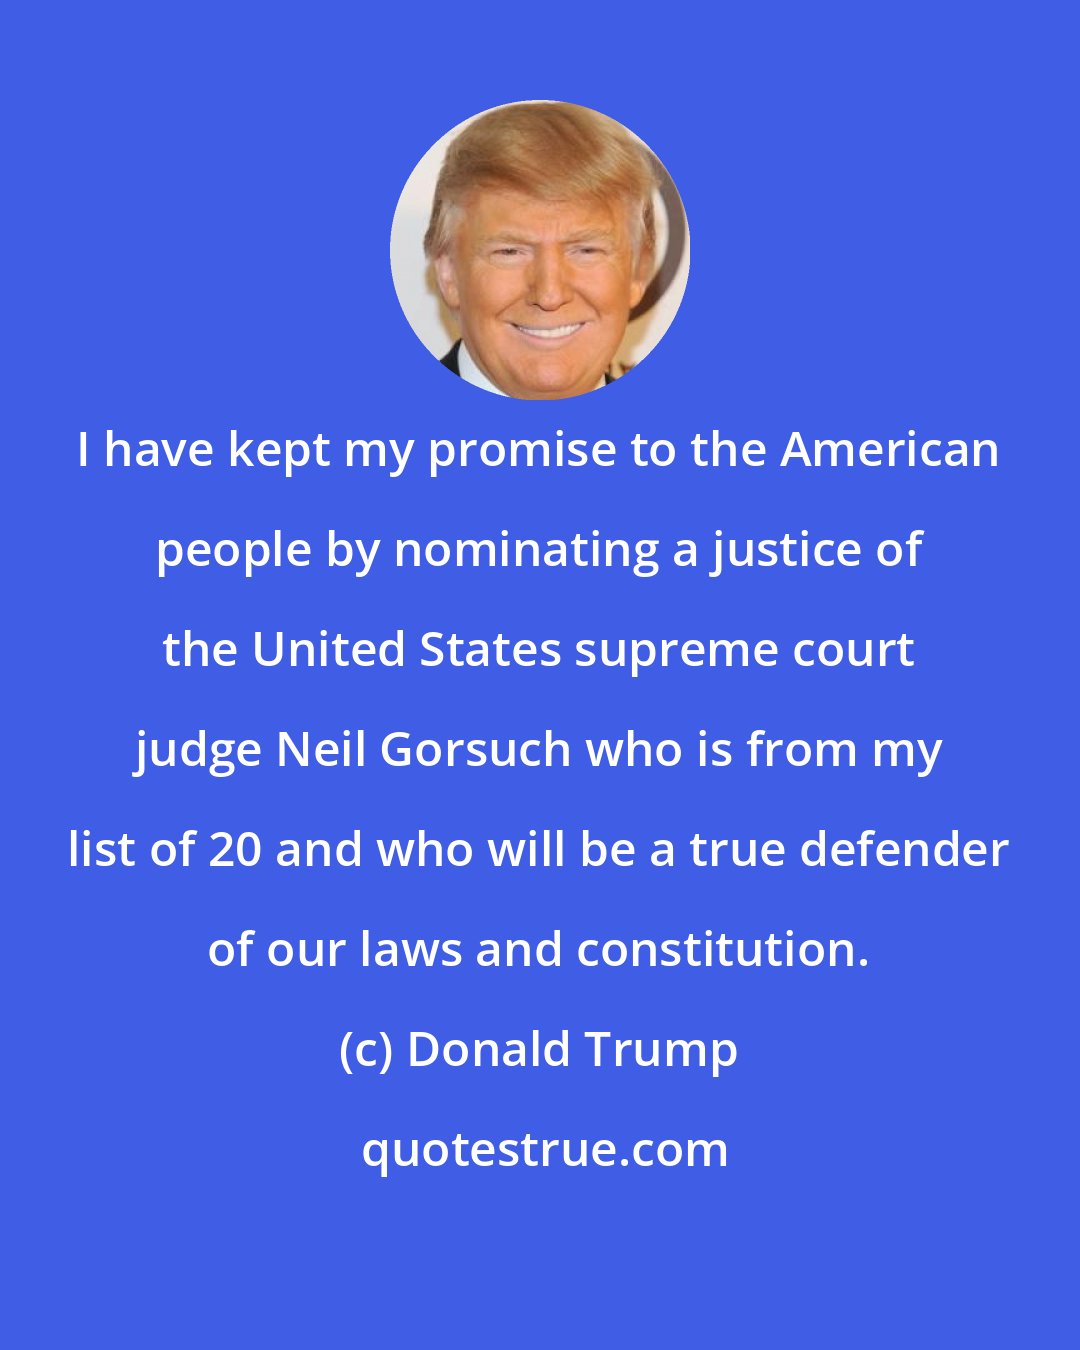 Donald Trump: I have kept my promise to the American people by nominating a justice of the United States supreme court judge Neil Gorsuch who is from my list of 20 and who will be a true defender of our laws and constitution.